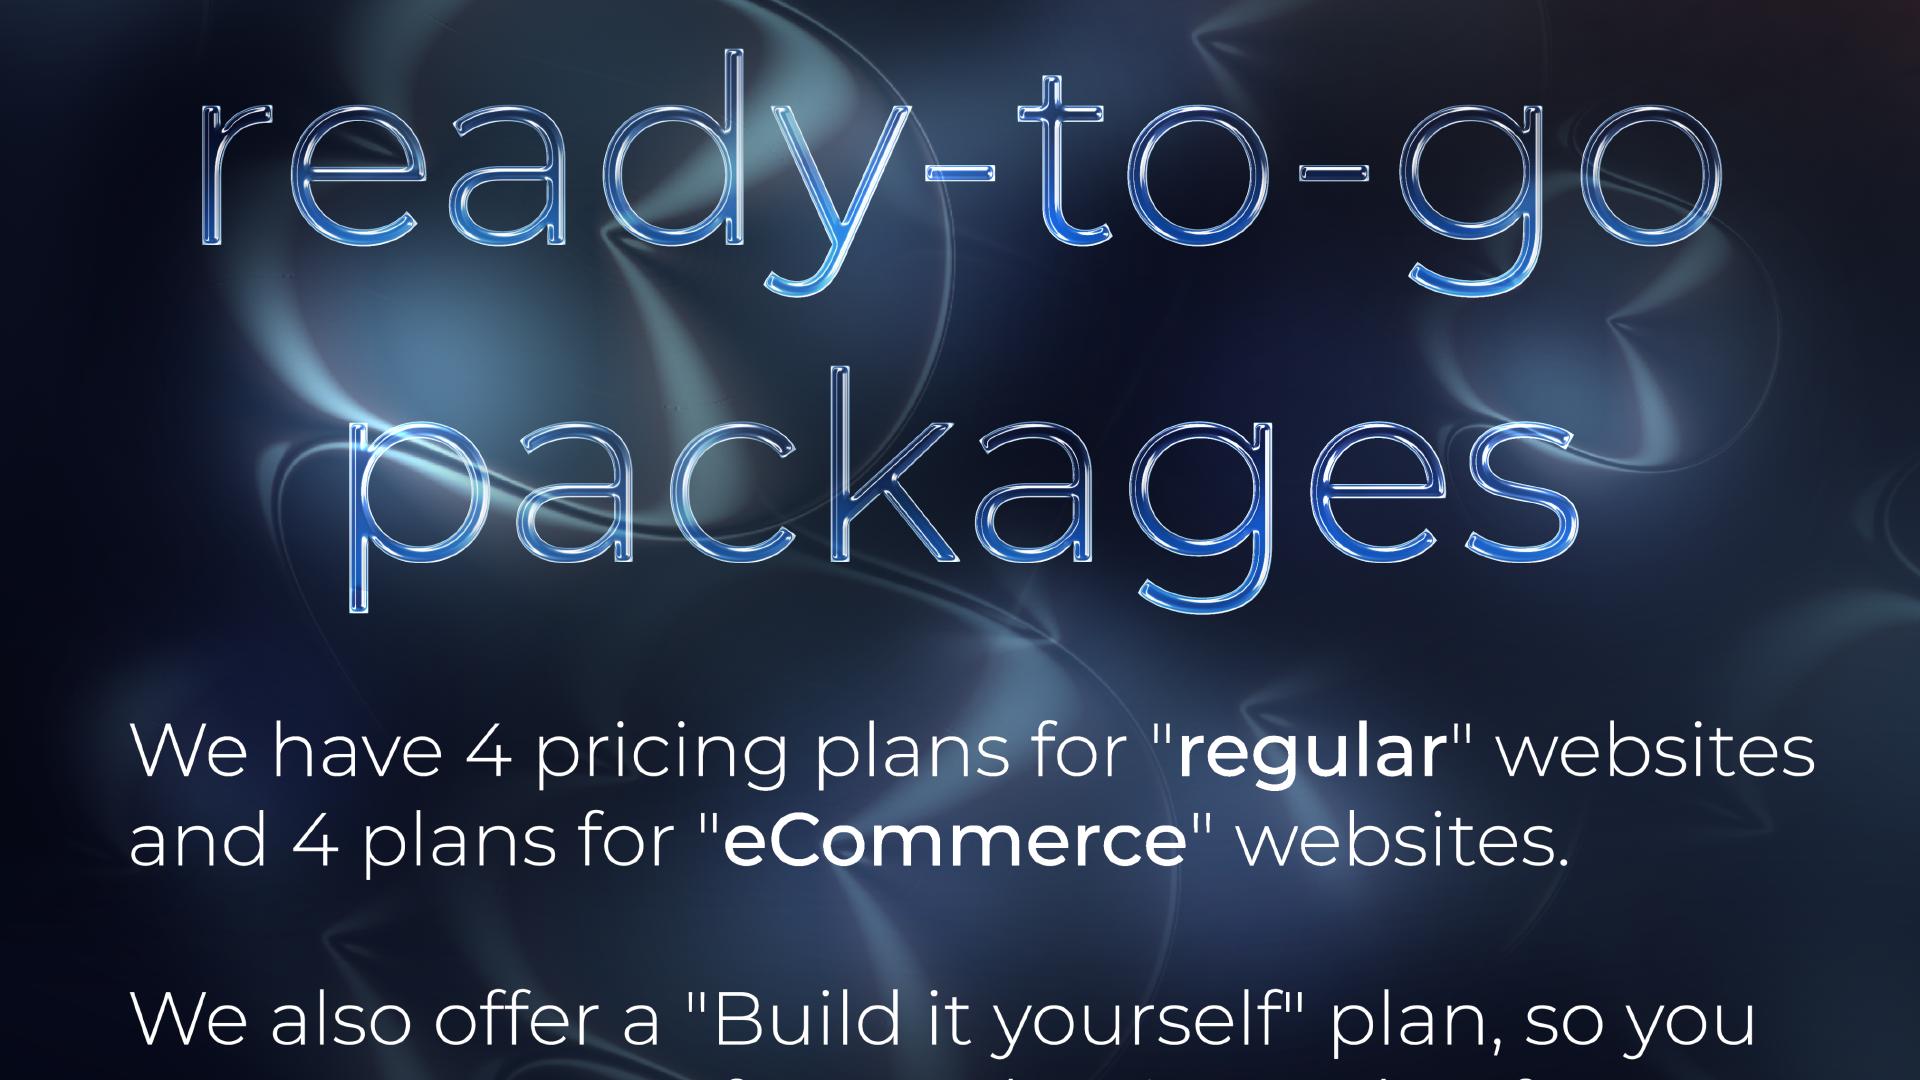 ... ready-to-go packages. We have 4 pricing plans for 'regular' websites and 4 plans for 'eCommerce' websites. We also offer a 'Build it yourself' plan so you ...